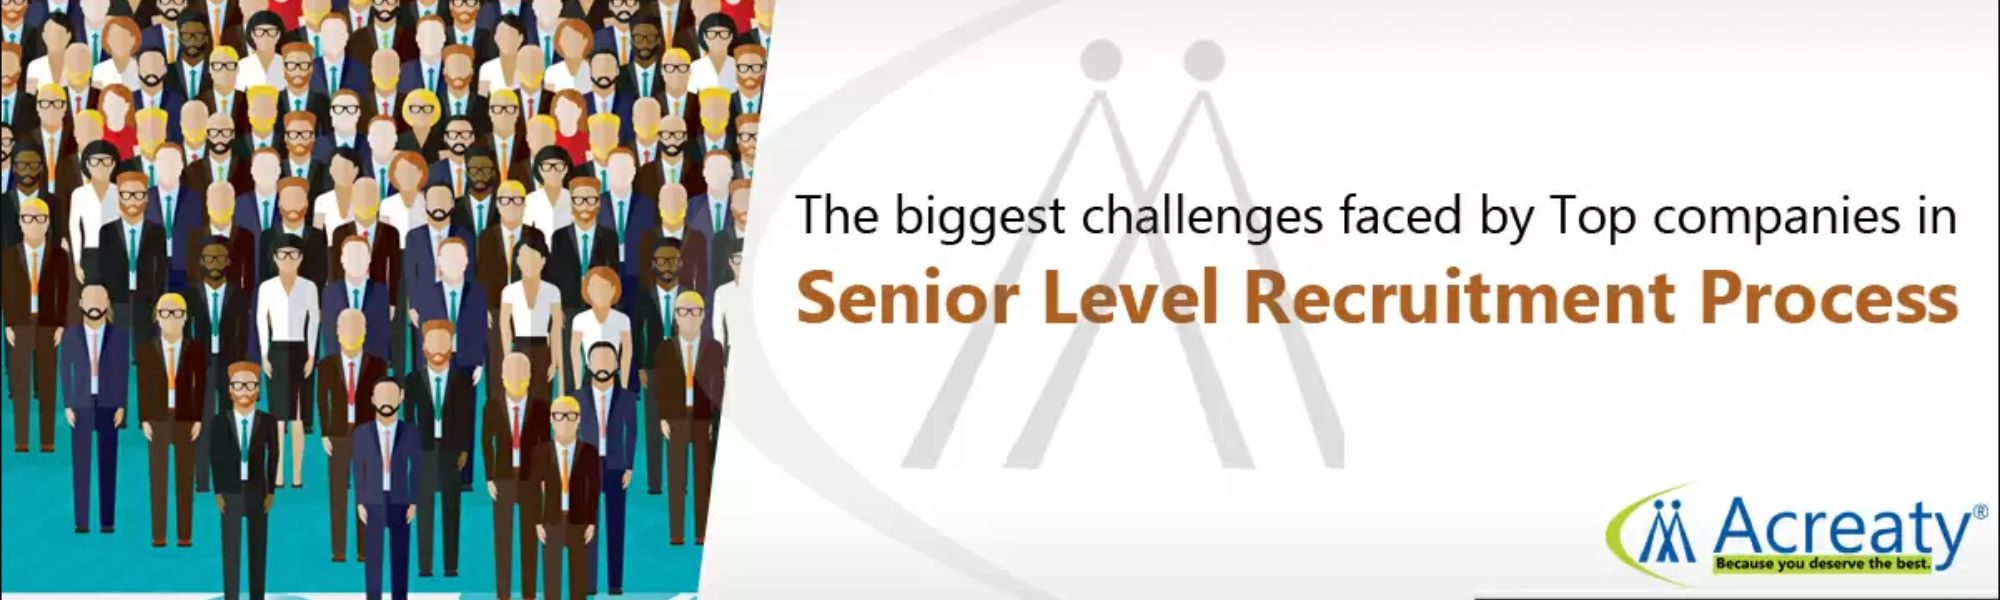 The biggest challenges faced by Top companies in Senior Level Recruitment Process